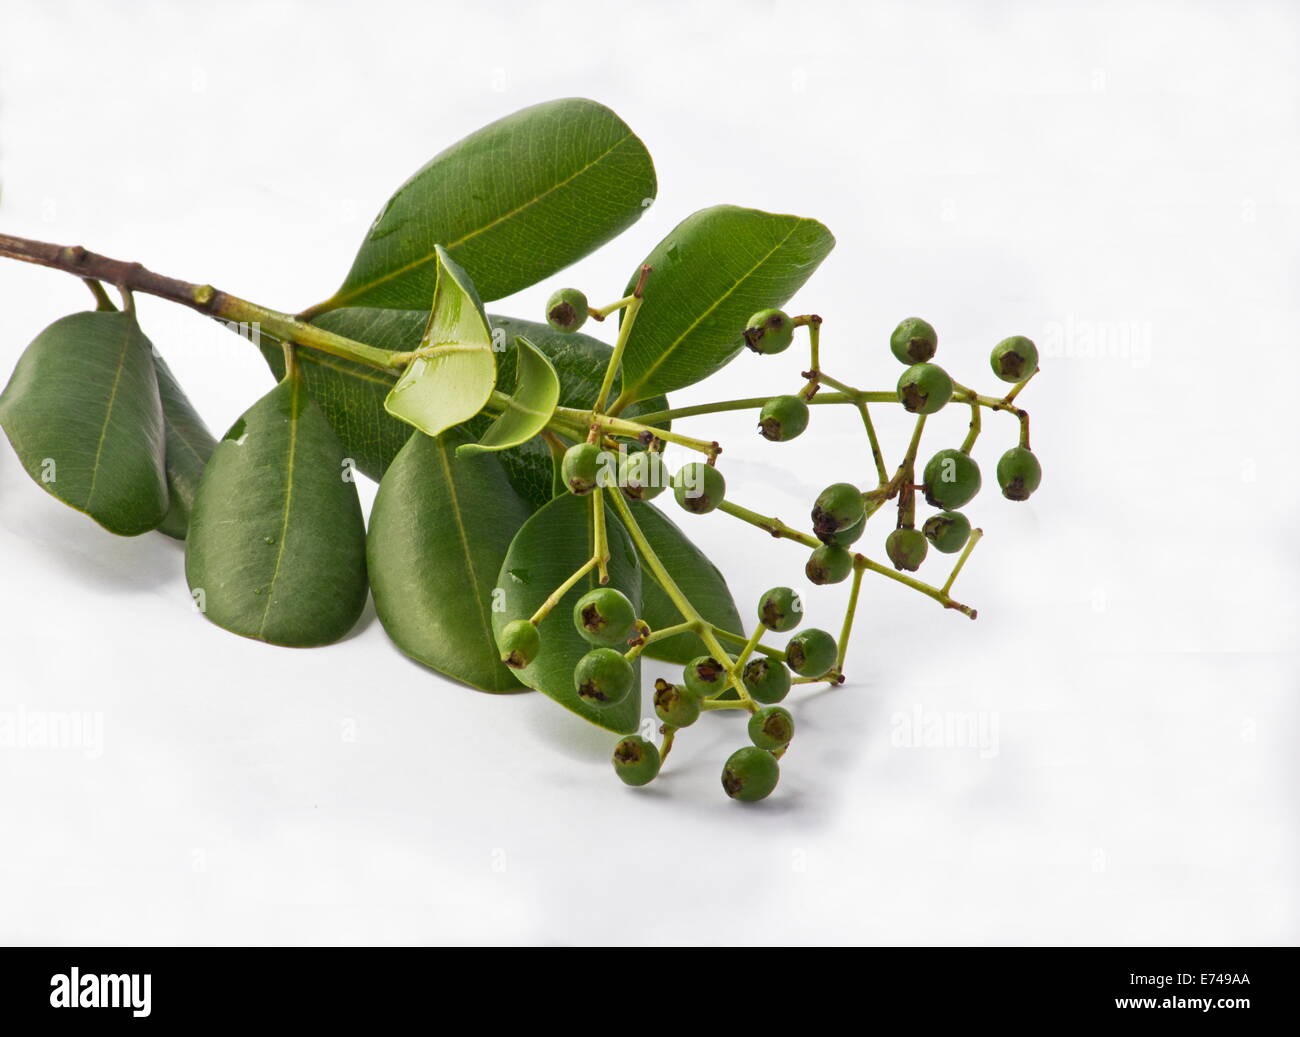 Allspice (Pimenta dioica) branch with leaves and fruits Stock Photo